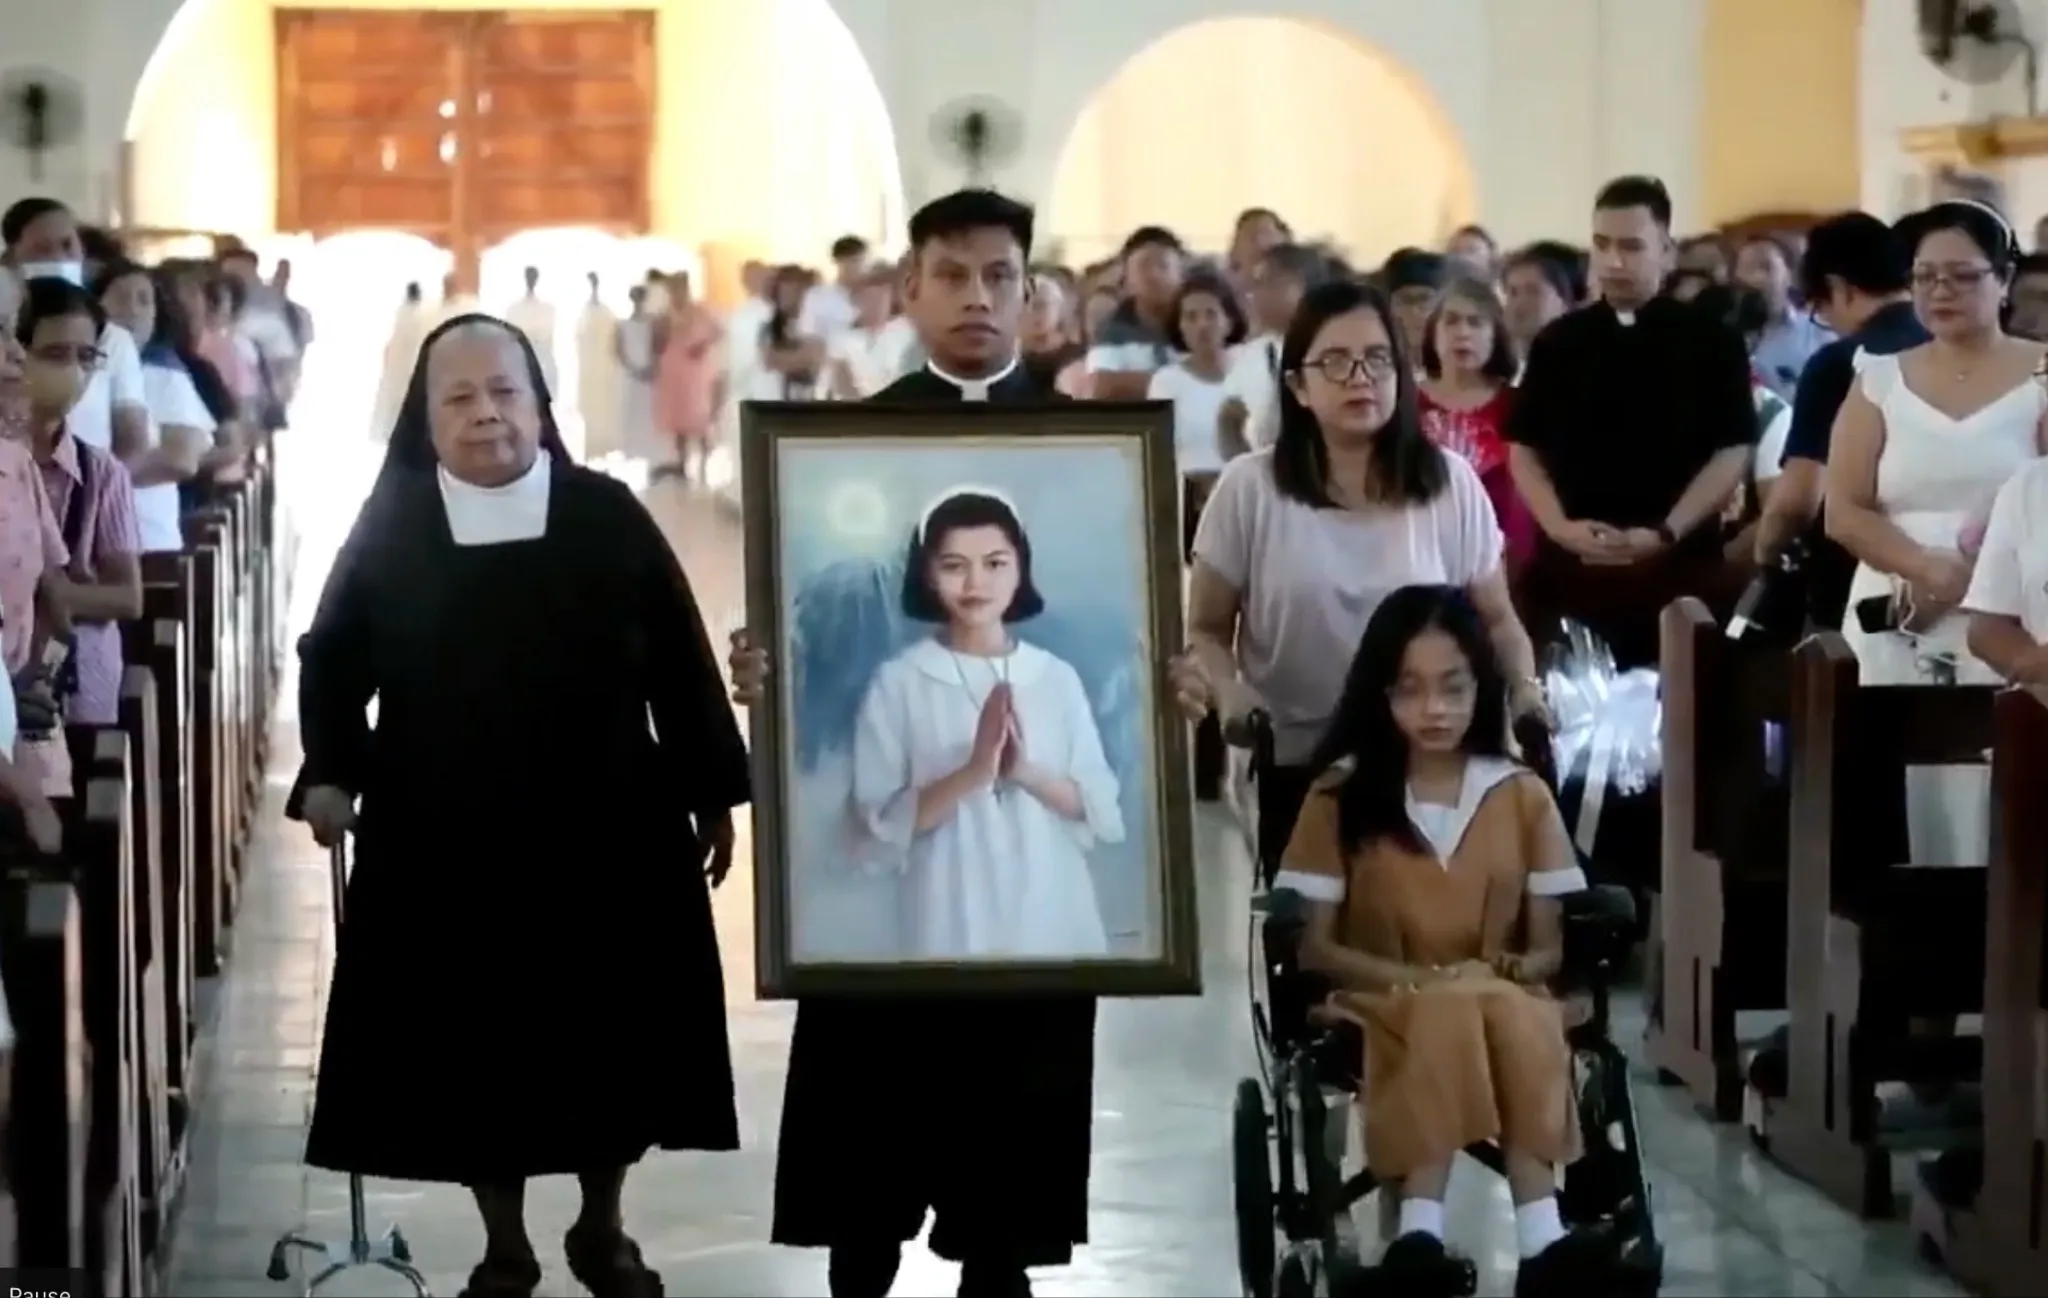 Exposition of the official portrait of Servant of God Niña Ruíz-Abad on April 7, 2024, at the Cathedral of St. William the Hermit in Laoag City, Philippines.?w=200&h=150